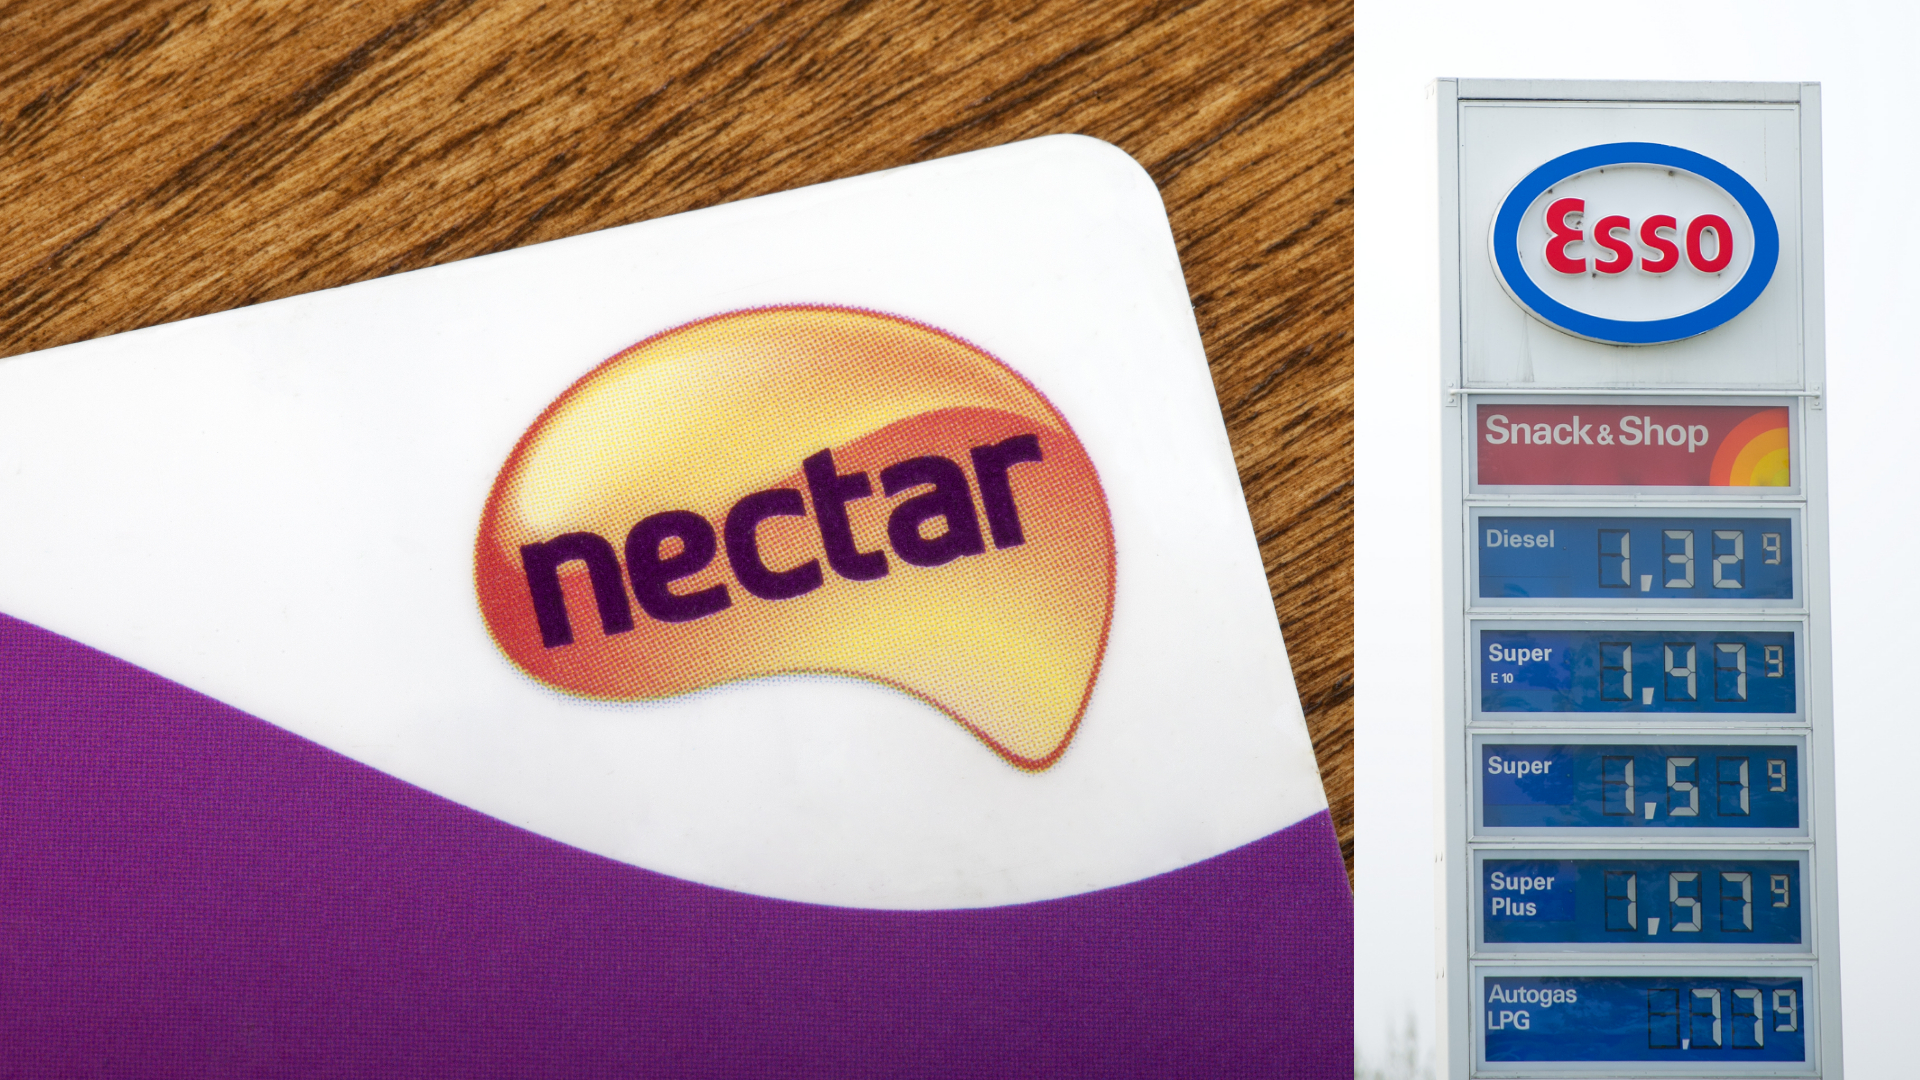 Esso partners up with Nectar